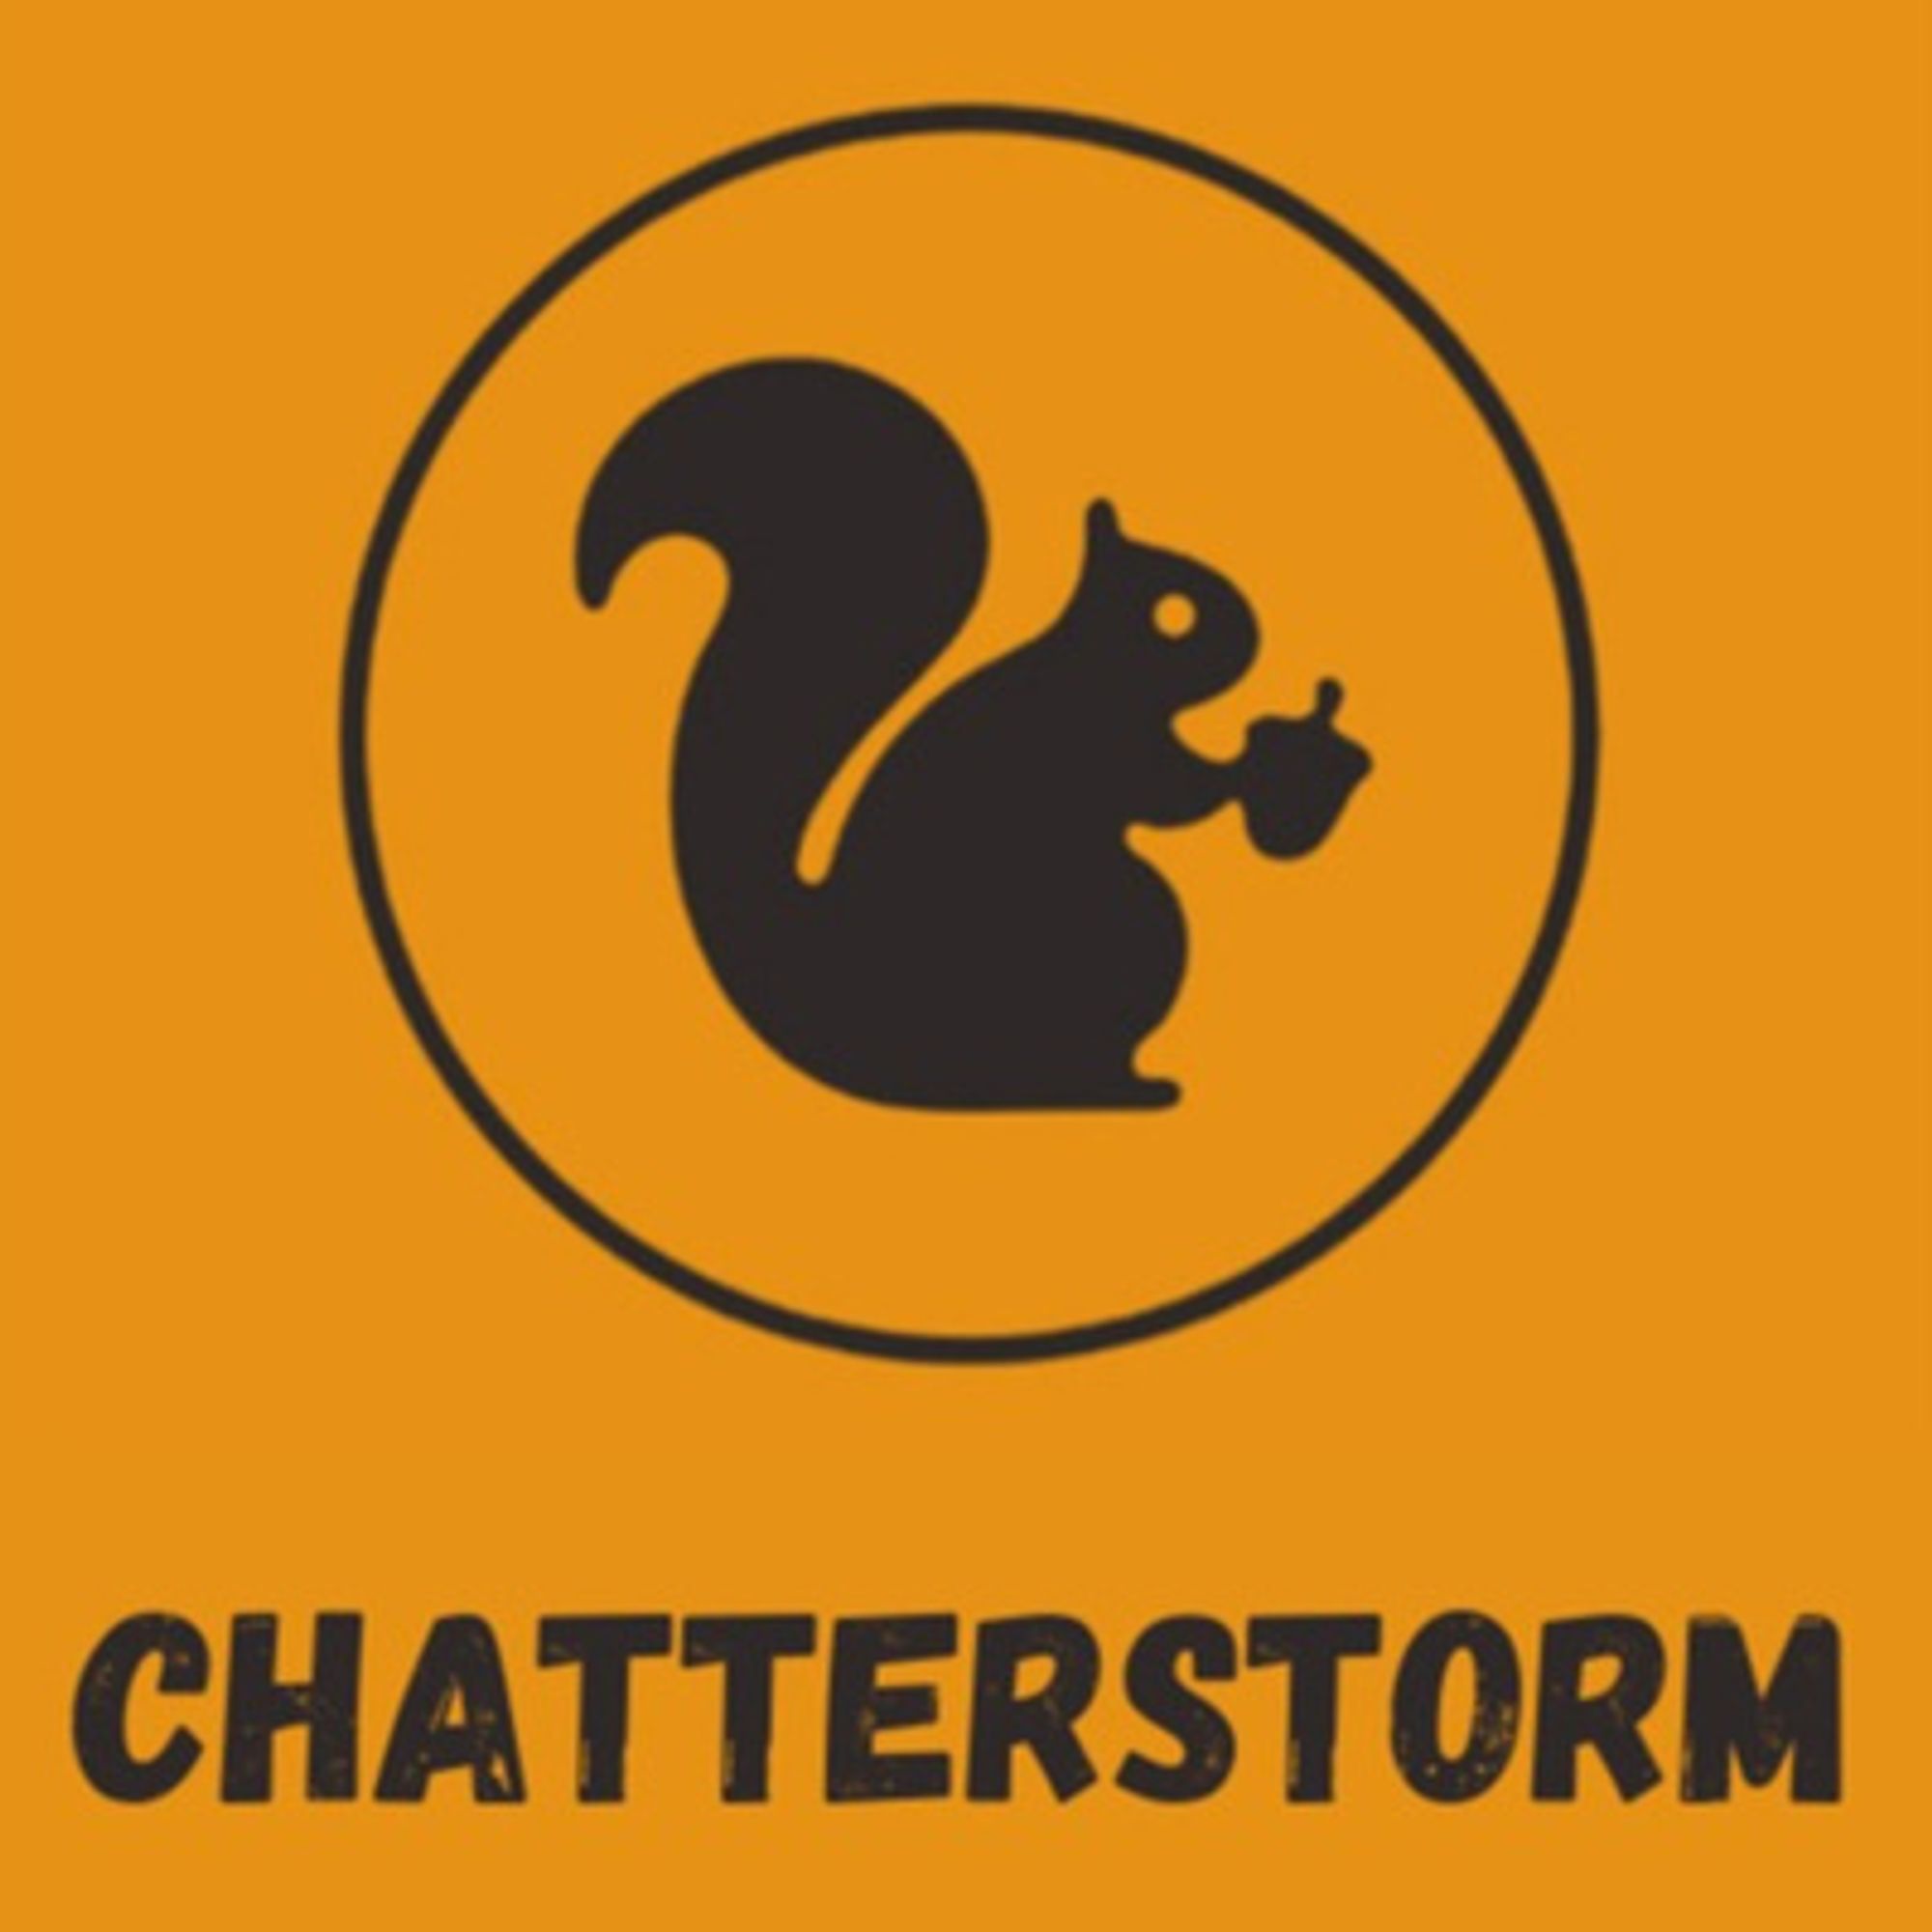 Chatterstorm